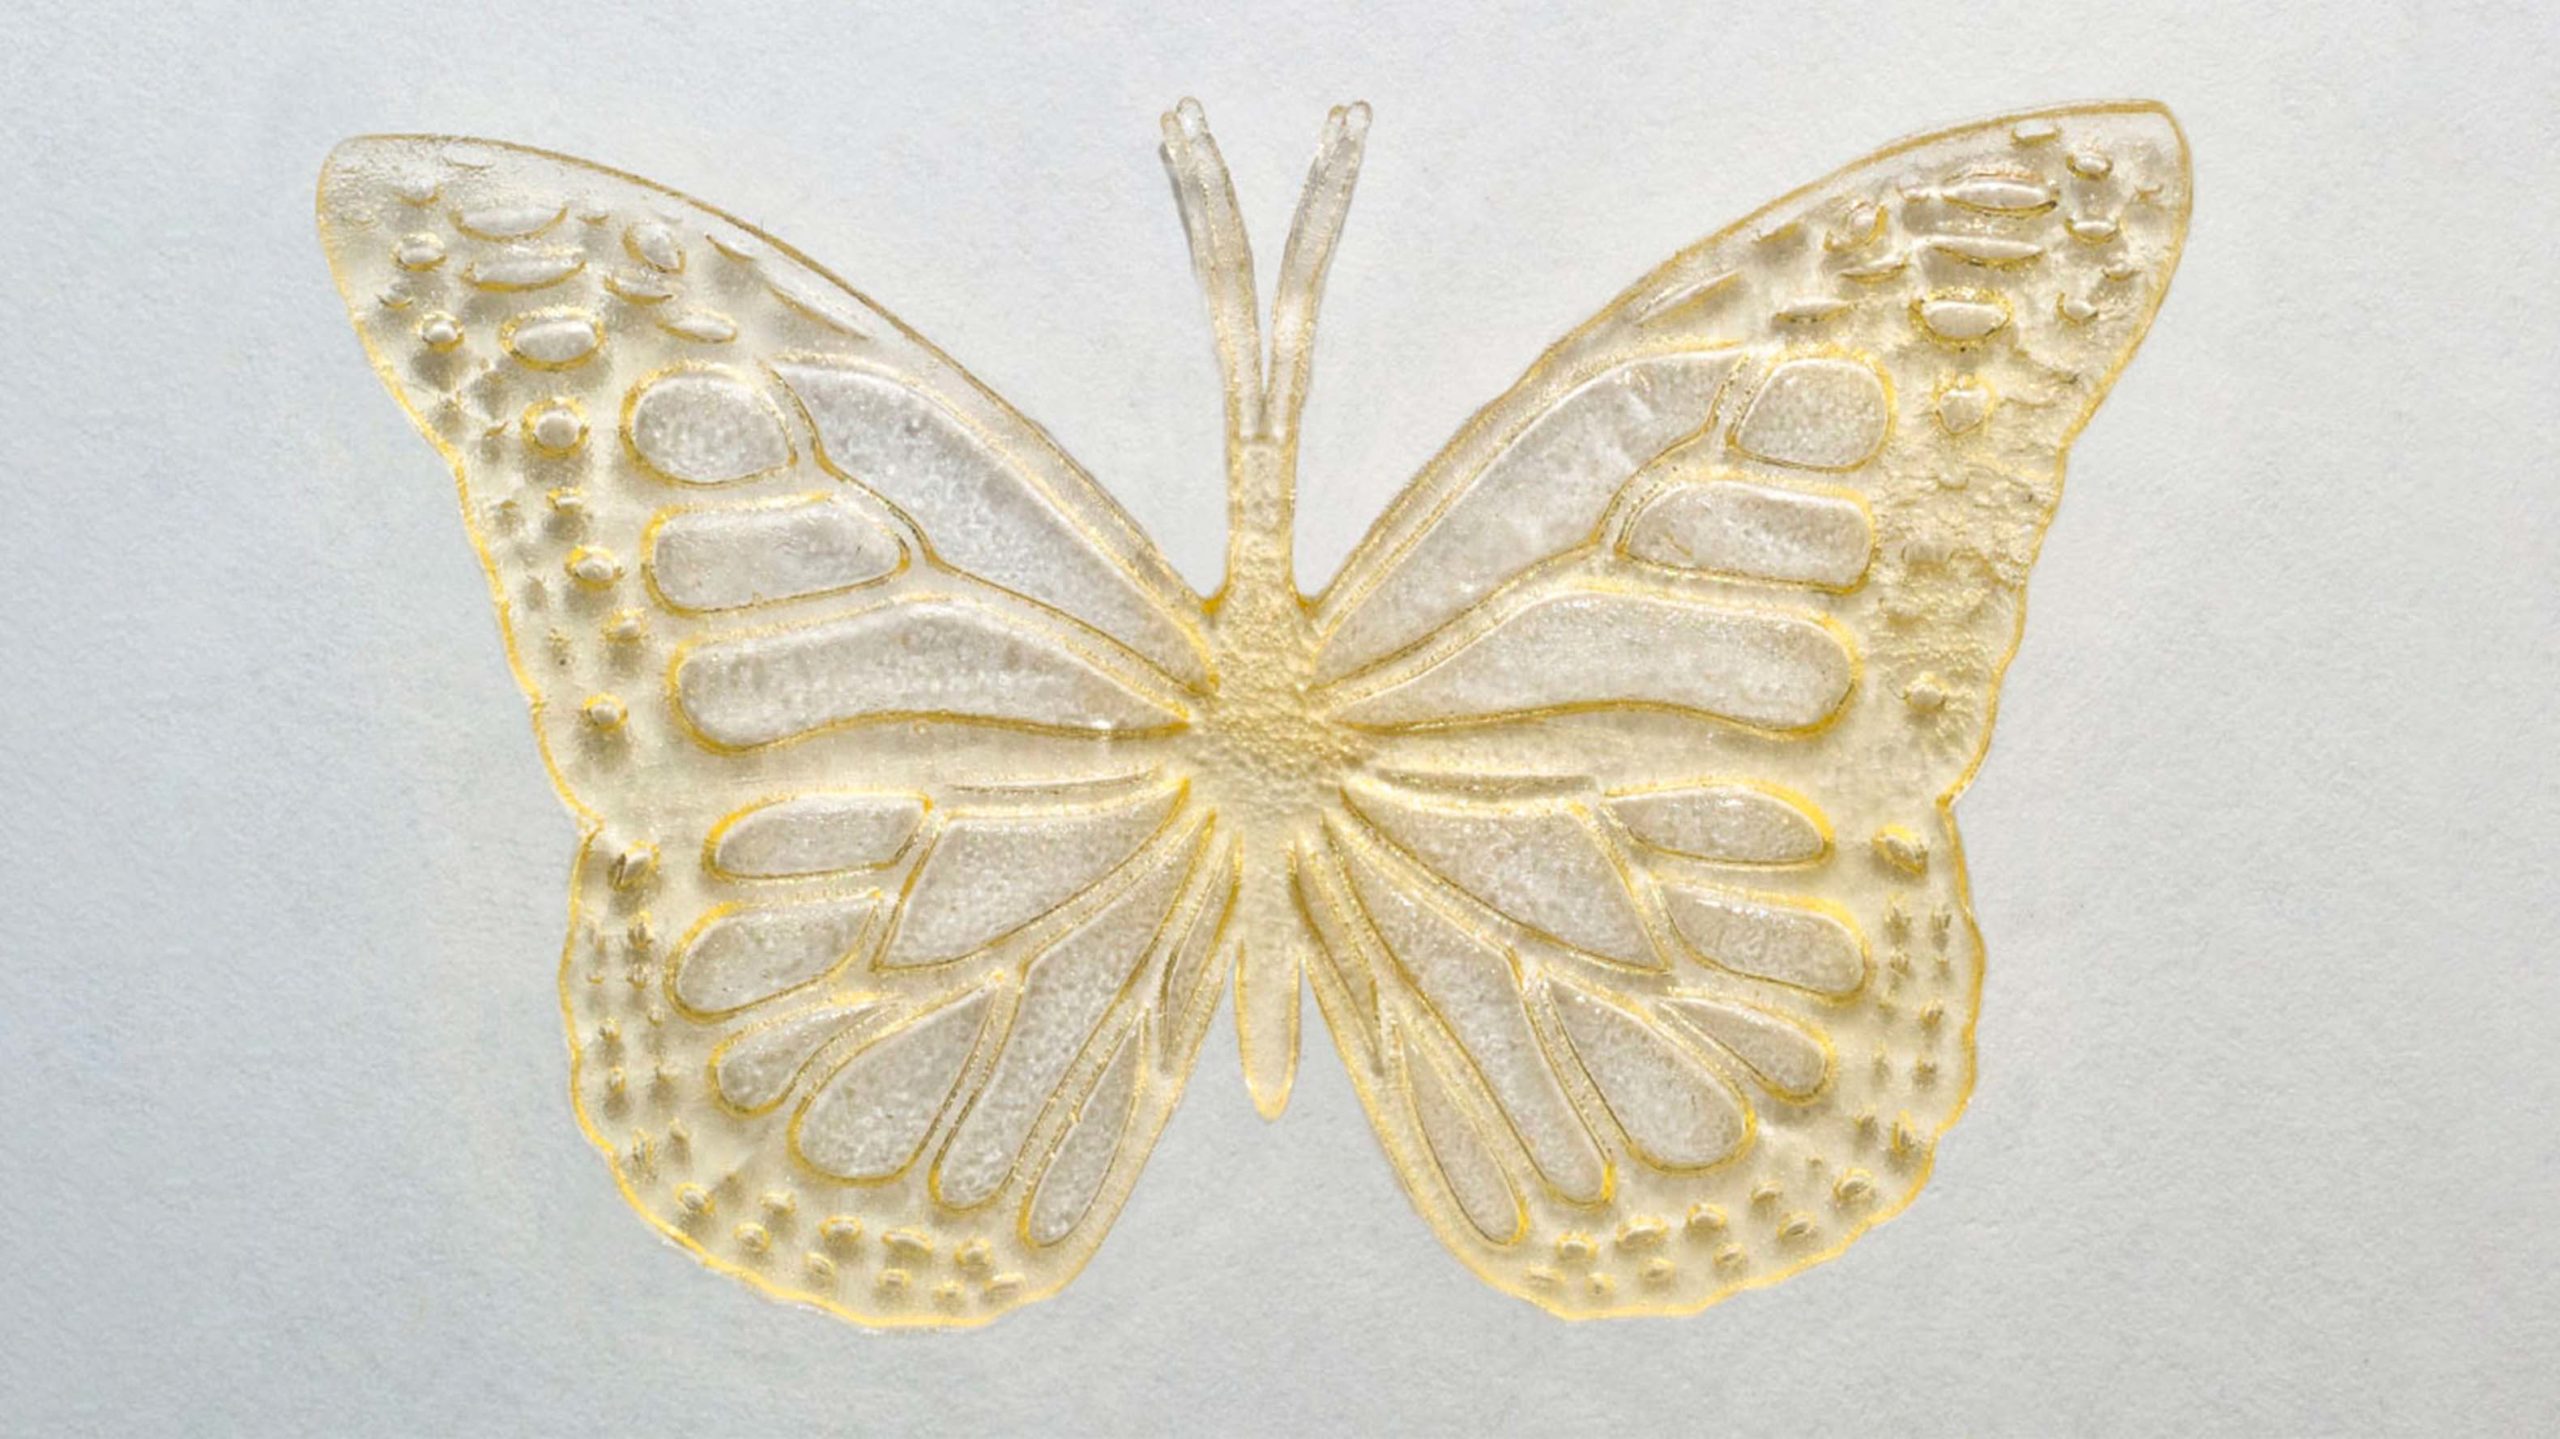 3D printed butterfly made with used cooking oil